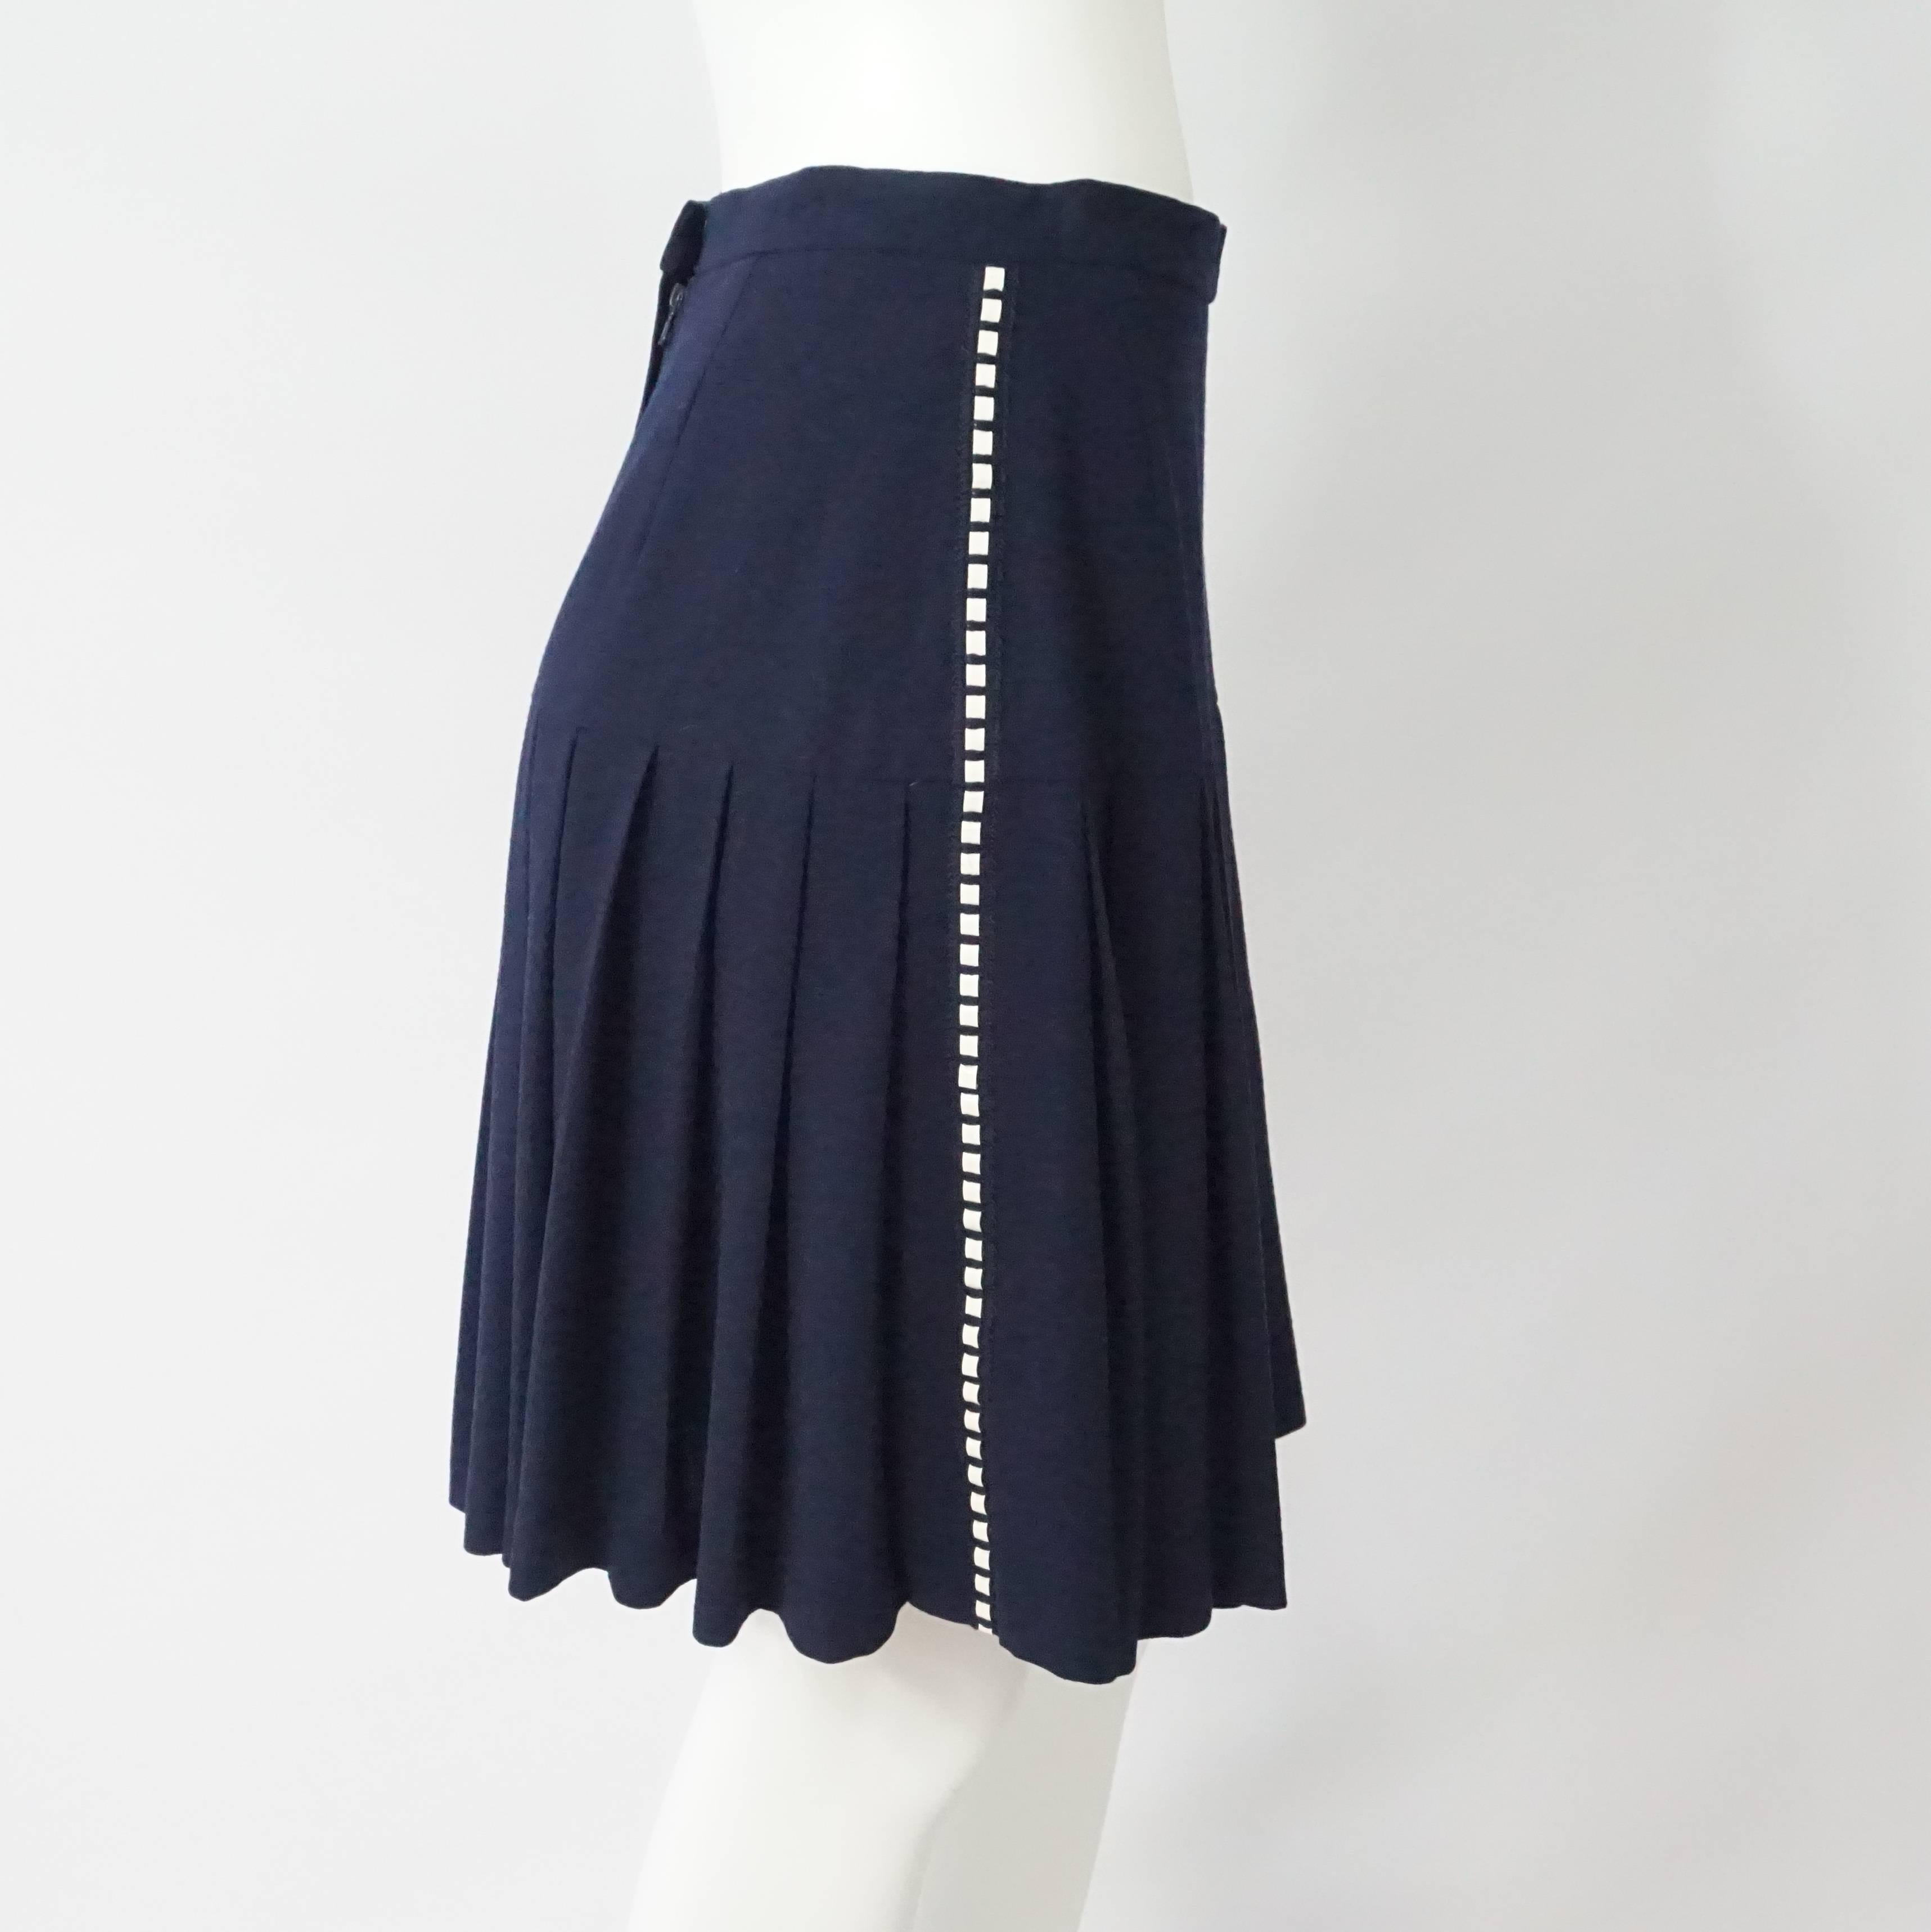 Chanel Navy Wool Pleated Skirt w/ white patent detail - 40 - Circa 80's This short navy wool skirt is fitted to the hips and then has pleats, along each side there is a threaded patent stripe detail, back zip and it is in excellent vintage